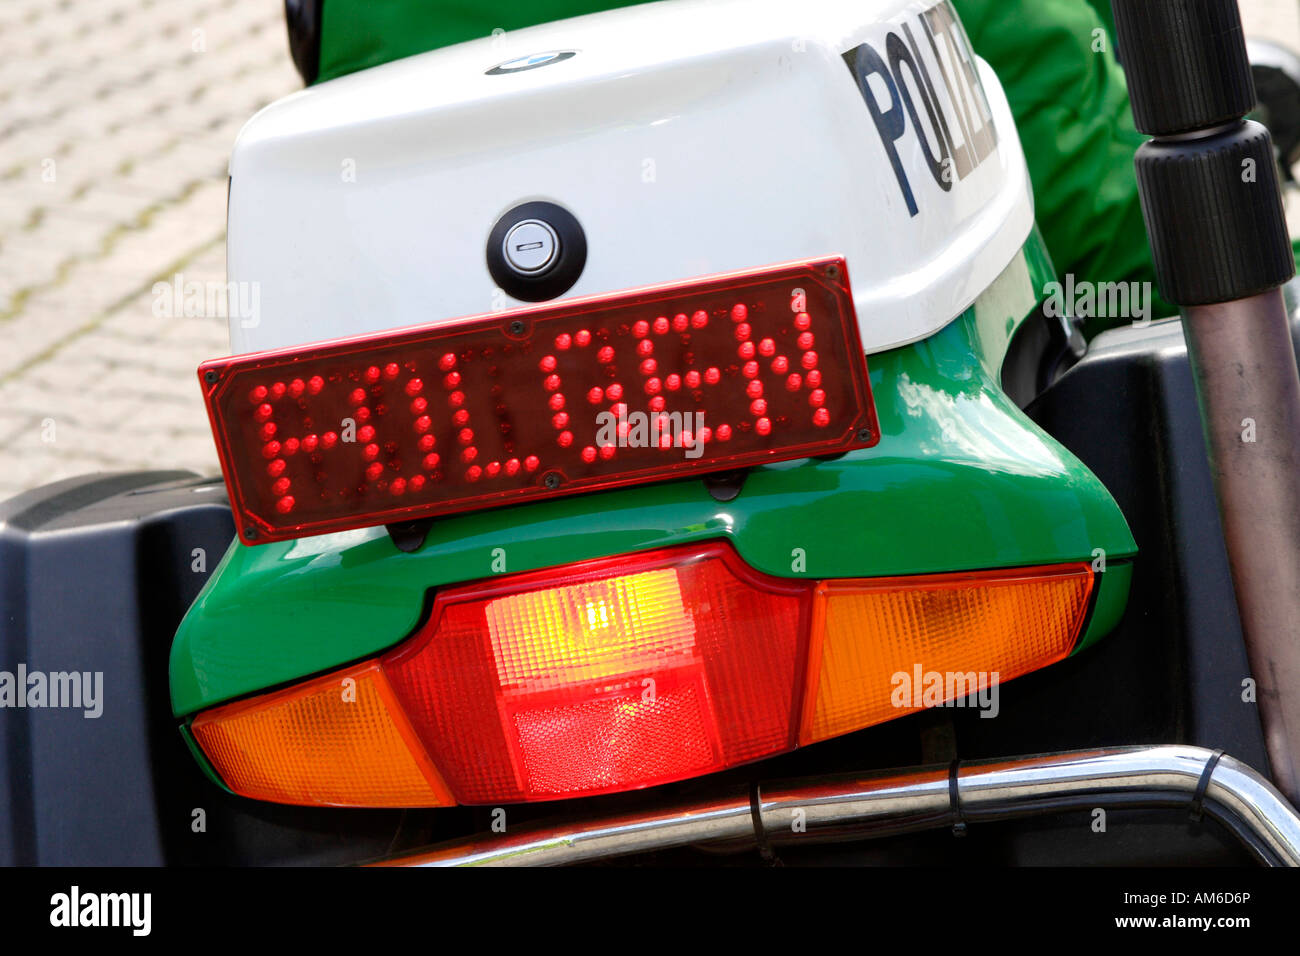 Police motorcycle with 'Folgen' (Follow) sign Stock Photo